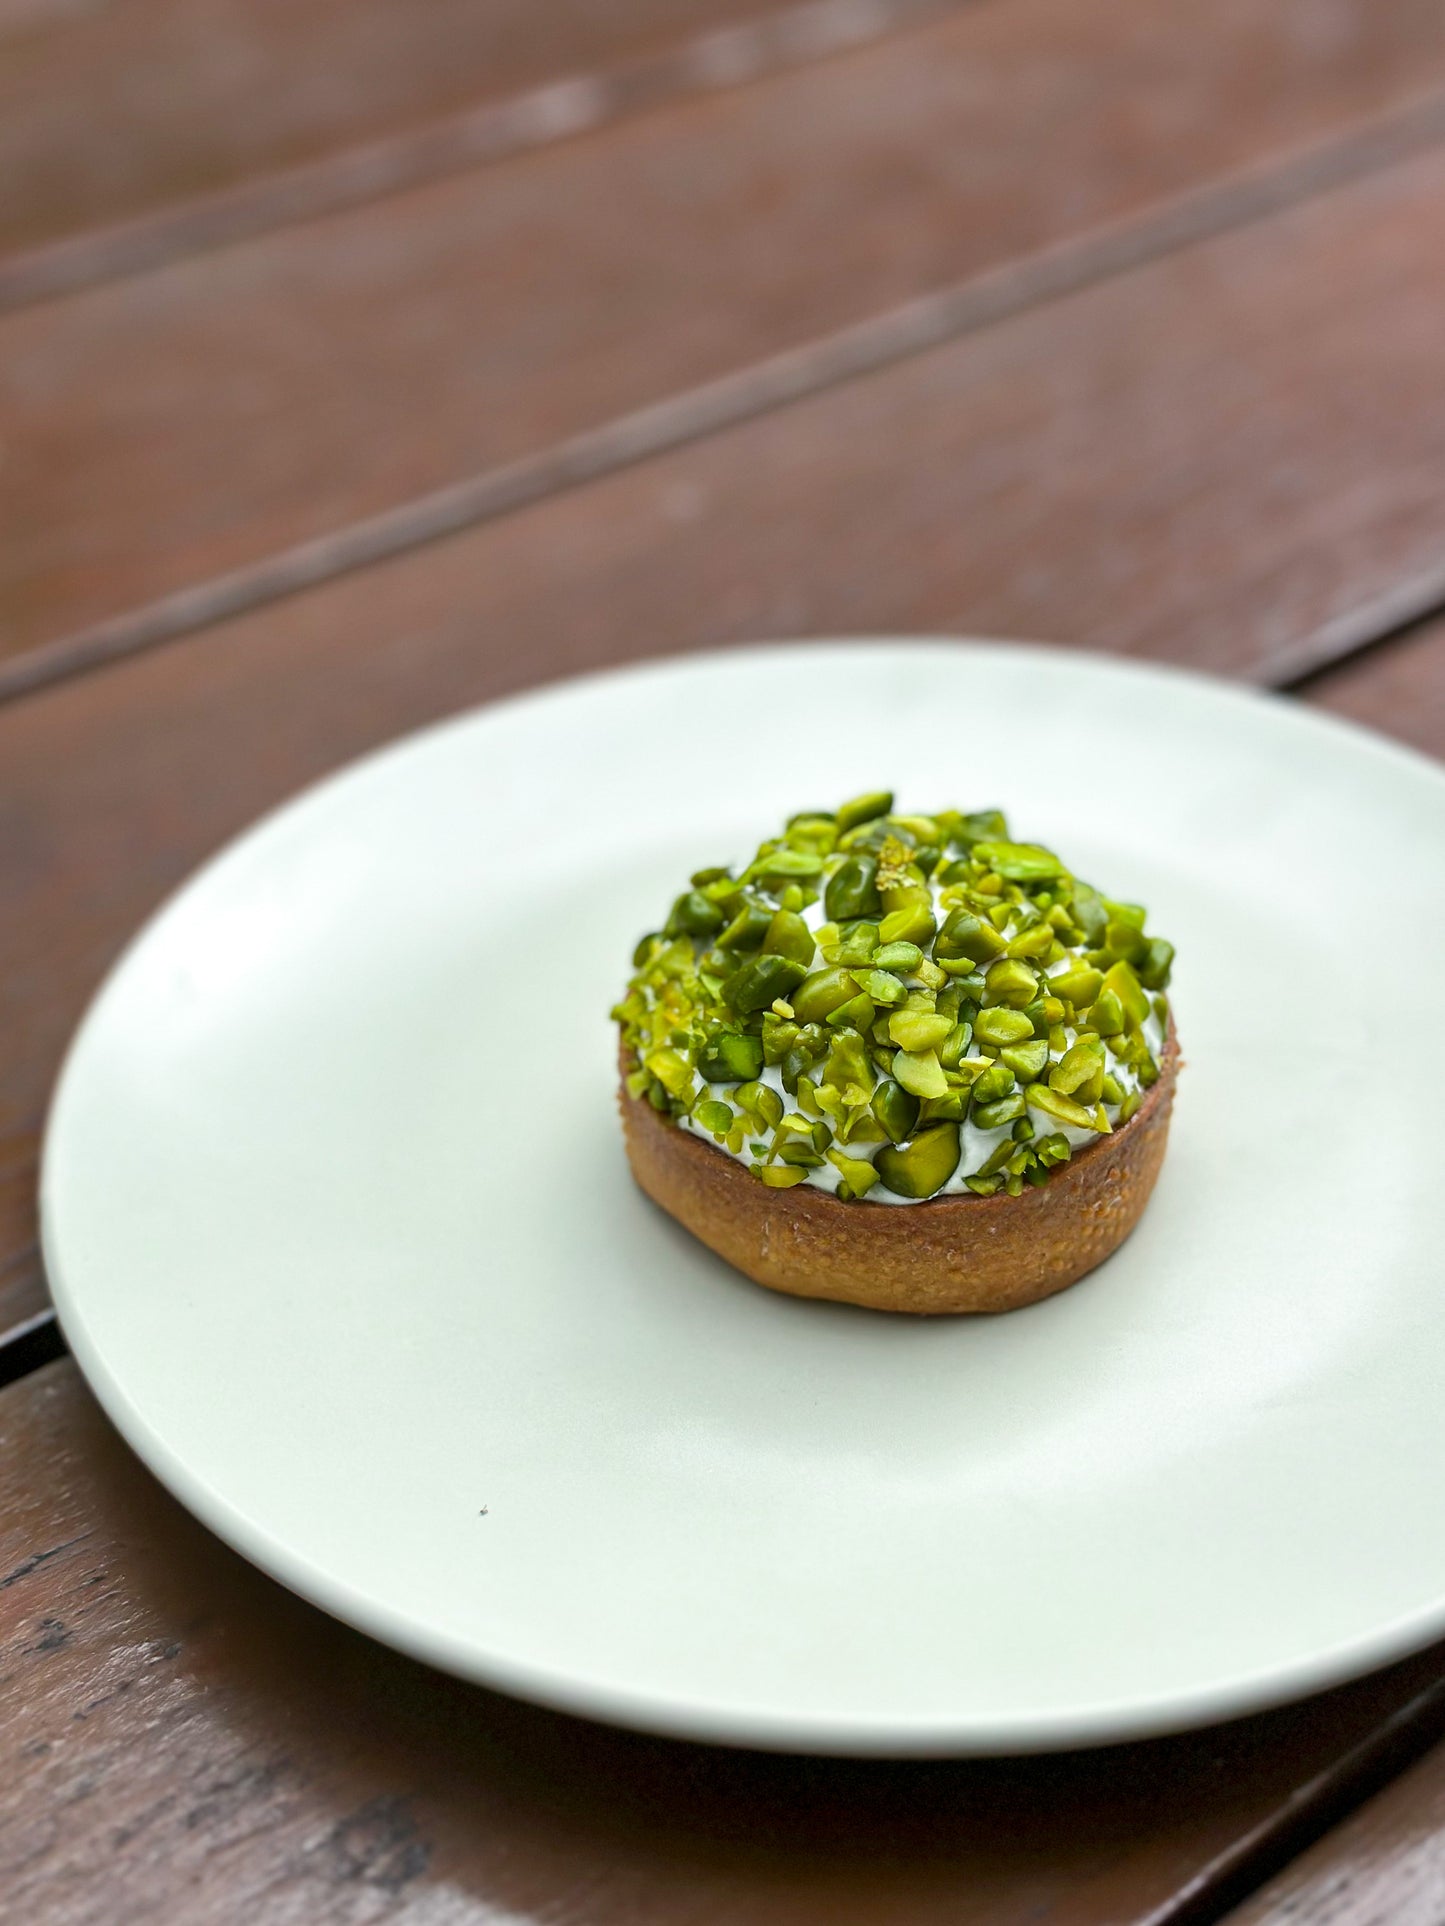 Our popular Pistachio Tart - with a crispy tart base, frangipane cream, crunchy pistachio praliné layer, liquid center of praliné, vanilla chantilly cream, and topped with chopped Iranian pistachios. The tart is rich in color, with layers of green, yellow, and beige, and is cut to show the different layers of the filling.